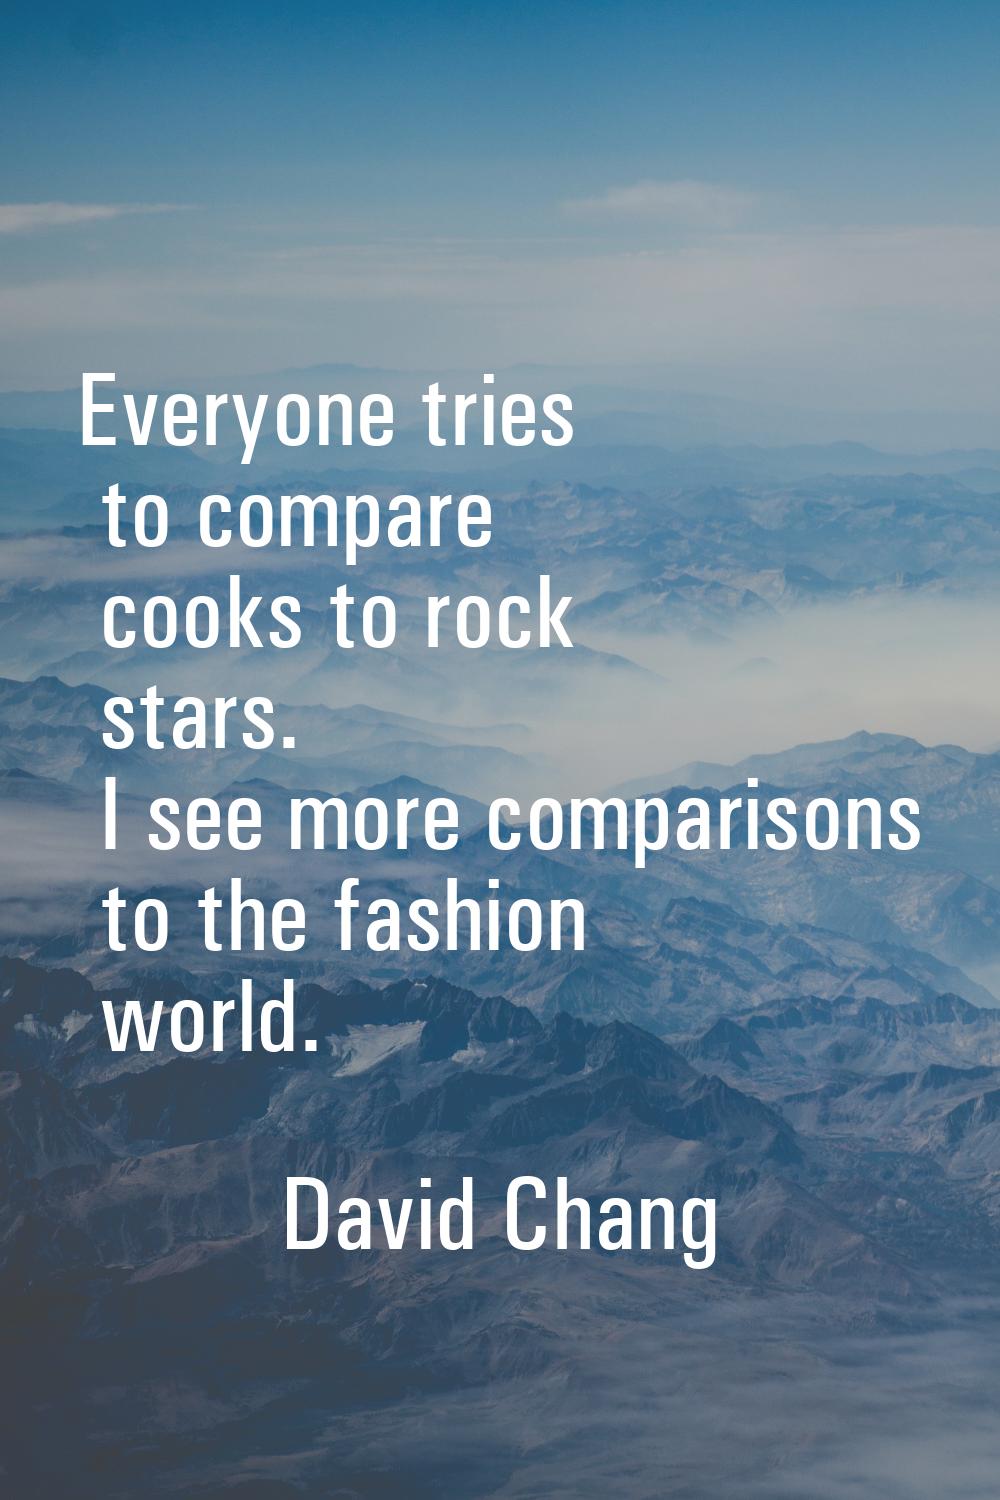 Everyone tries to compare cooks to rock stars. I see more comparisons to the fashion world.